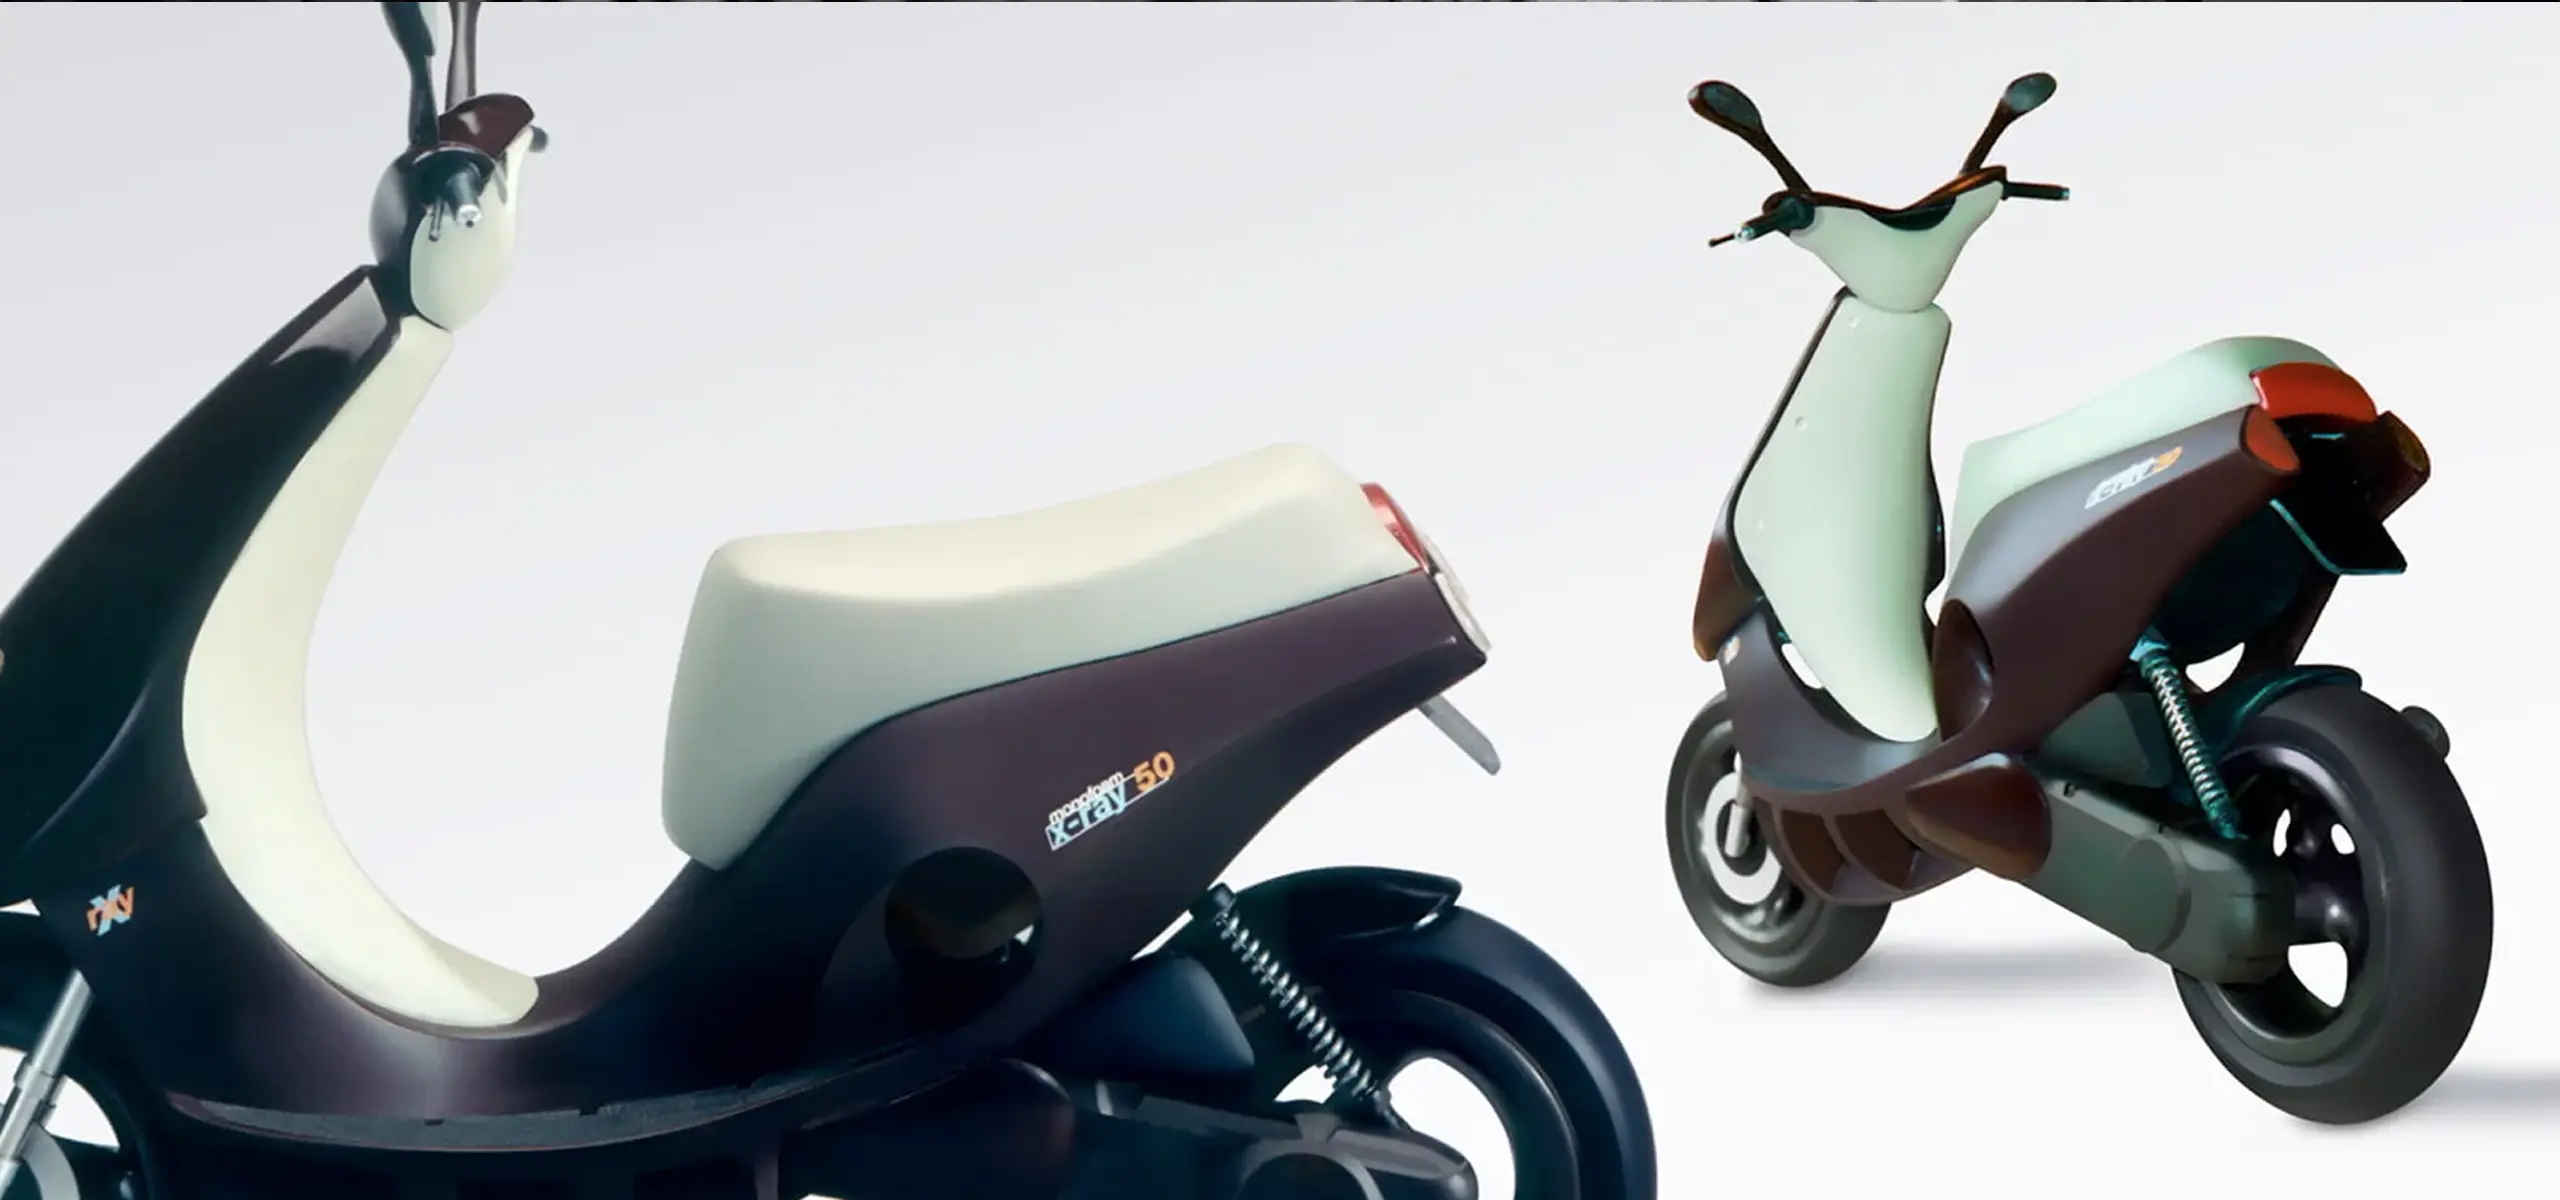 scooter design concept by Groen & Boothman